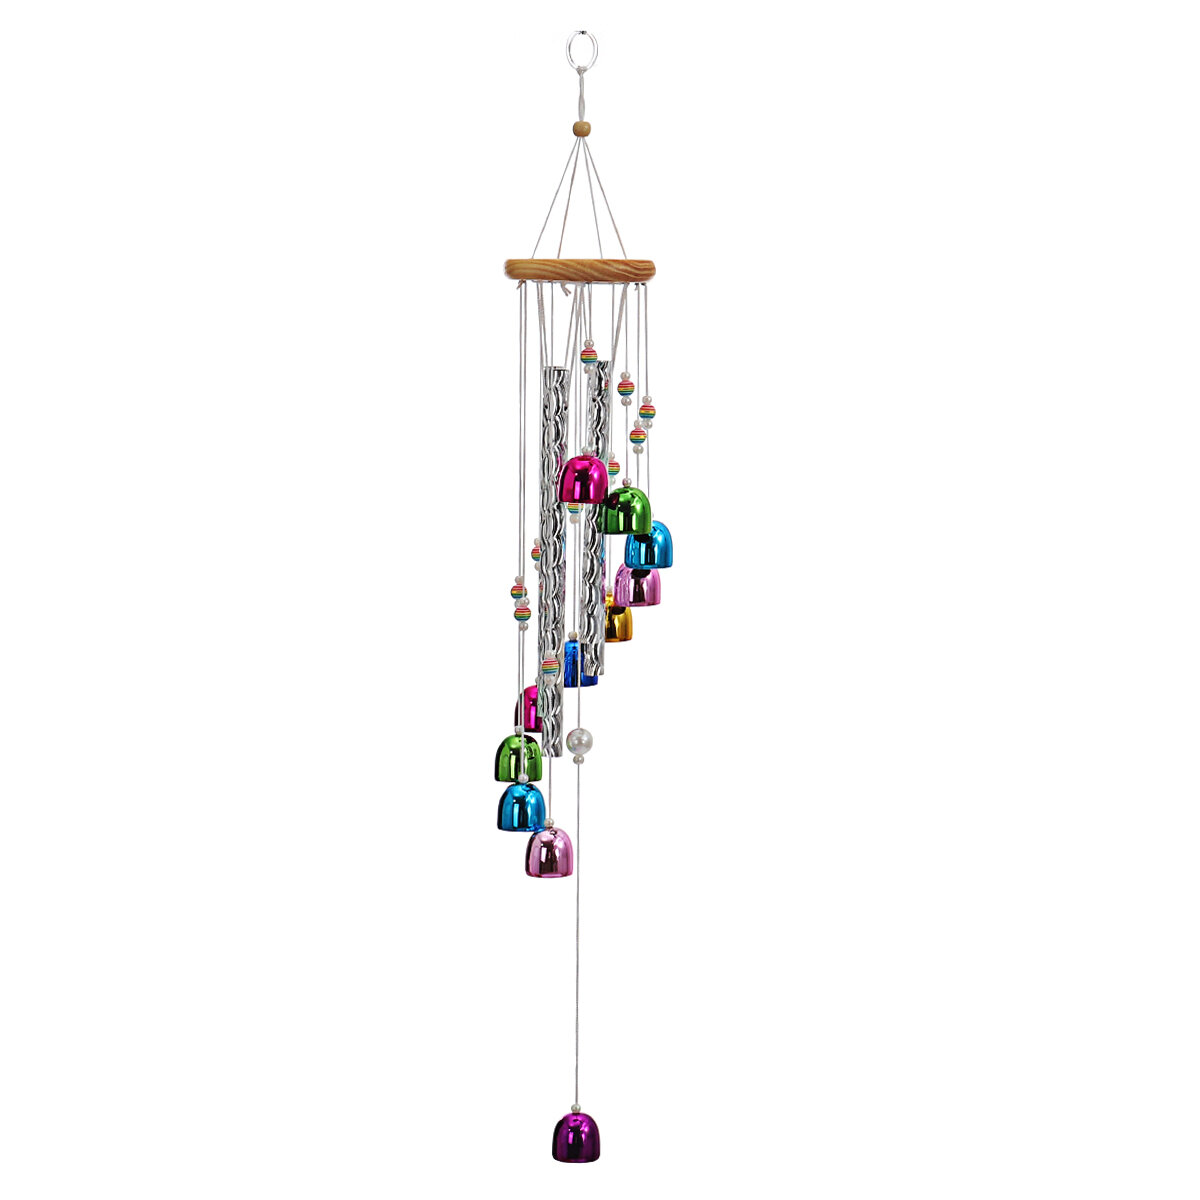 Colorful 4 Pipes 11 Bells Wind Chime Outdoor Garden Yard Bells Hanging Charm Decor Ornament for Gifts